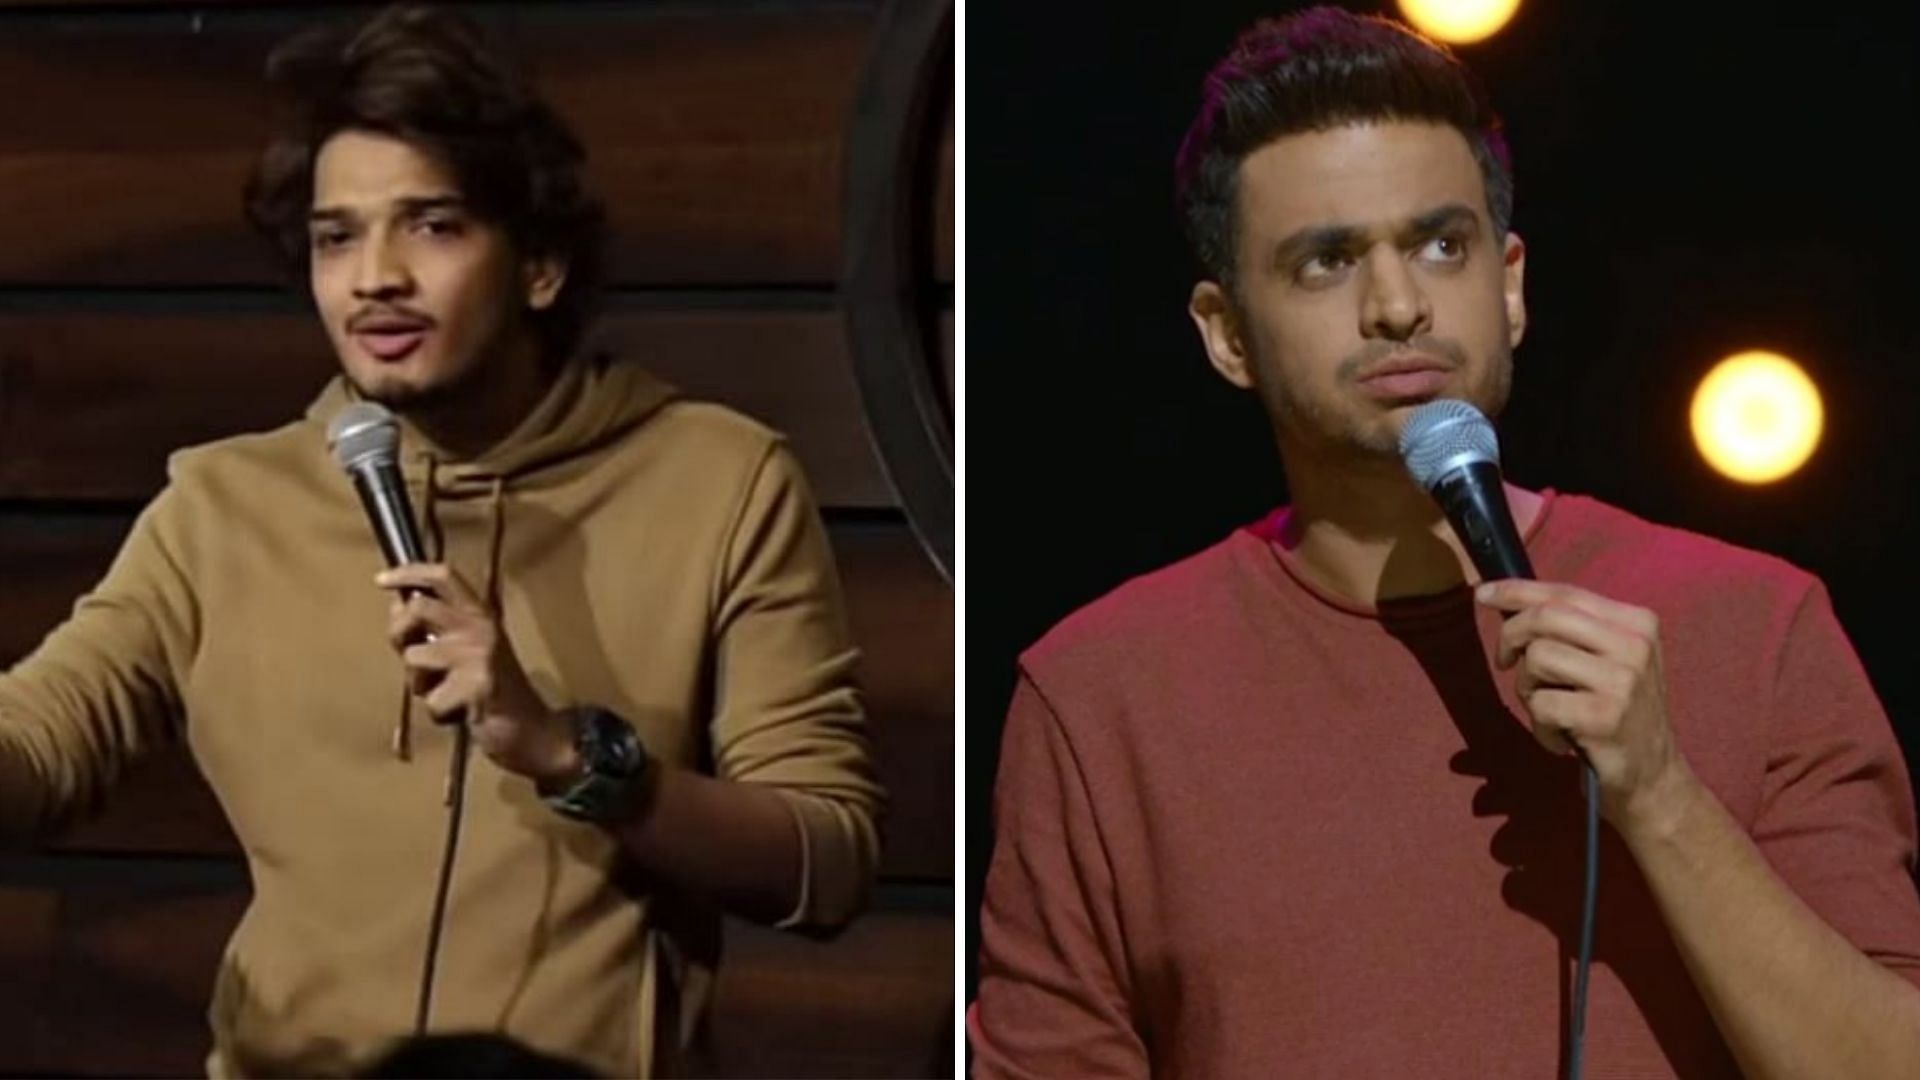 Here's why Indian comedians have been targeted on social media.